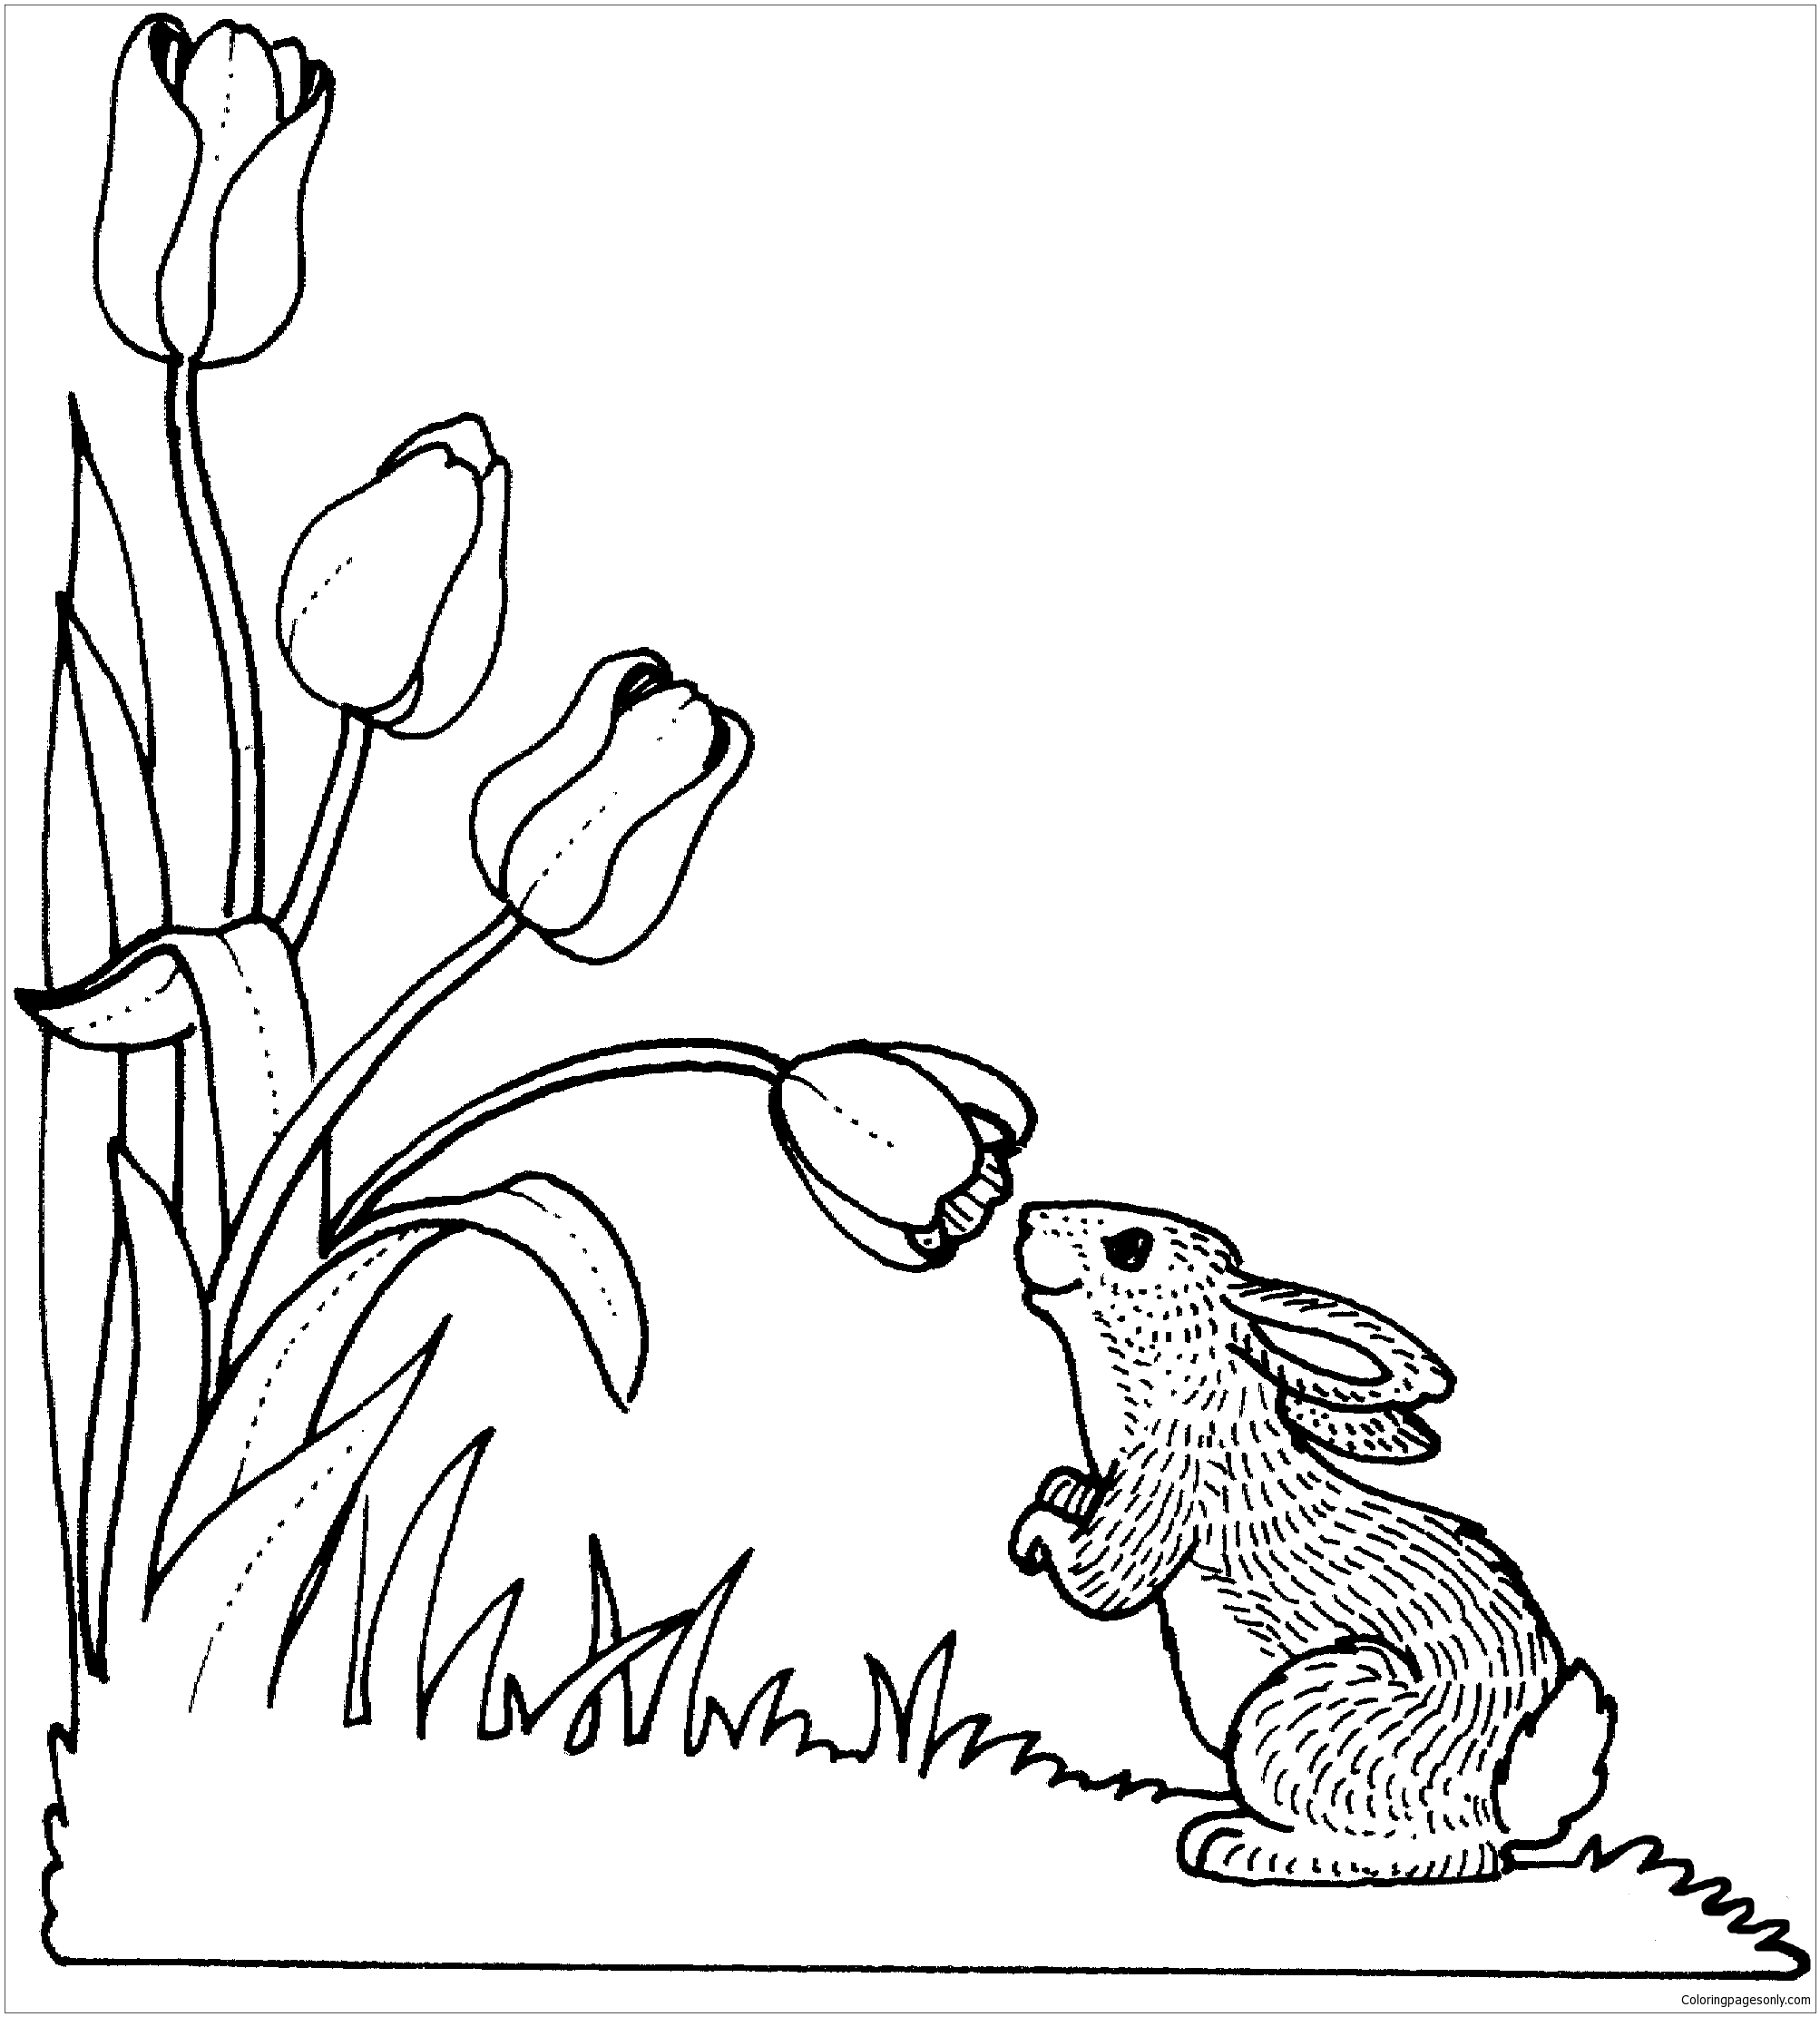 Rabbit Smelling Tulip Coloring Page